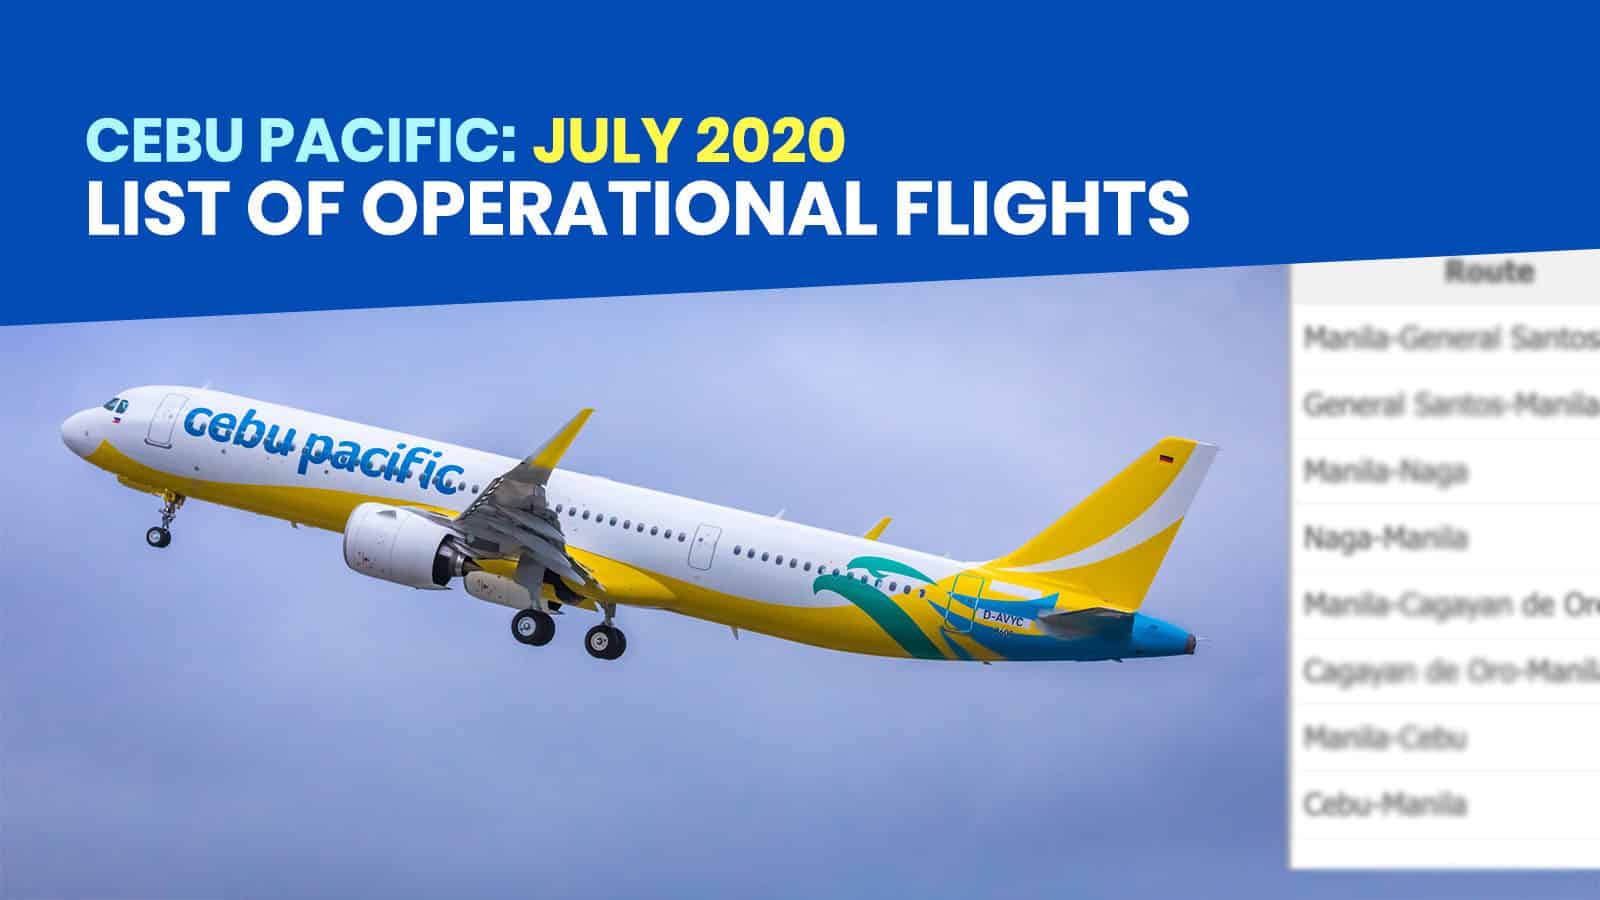 CEBU PACIFIC: List of Operational Flights for JULY 2020